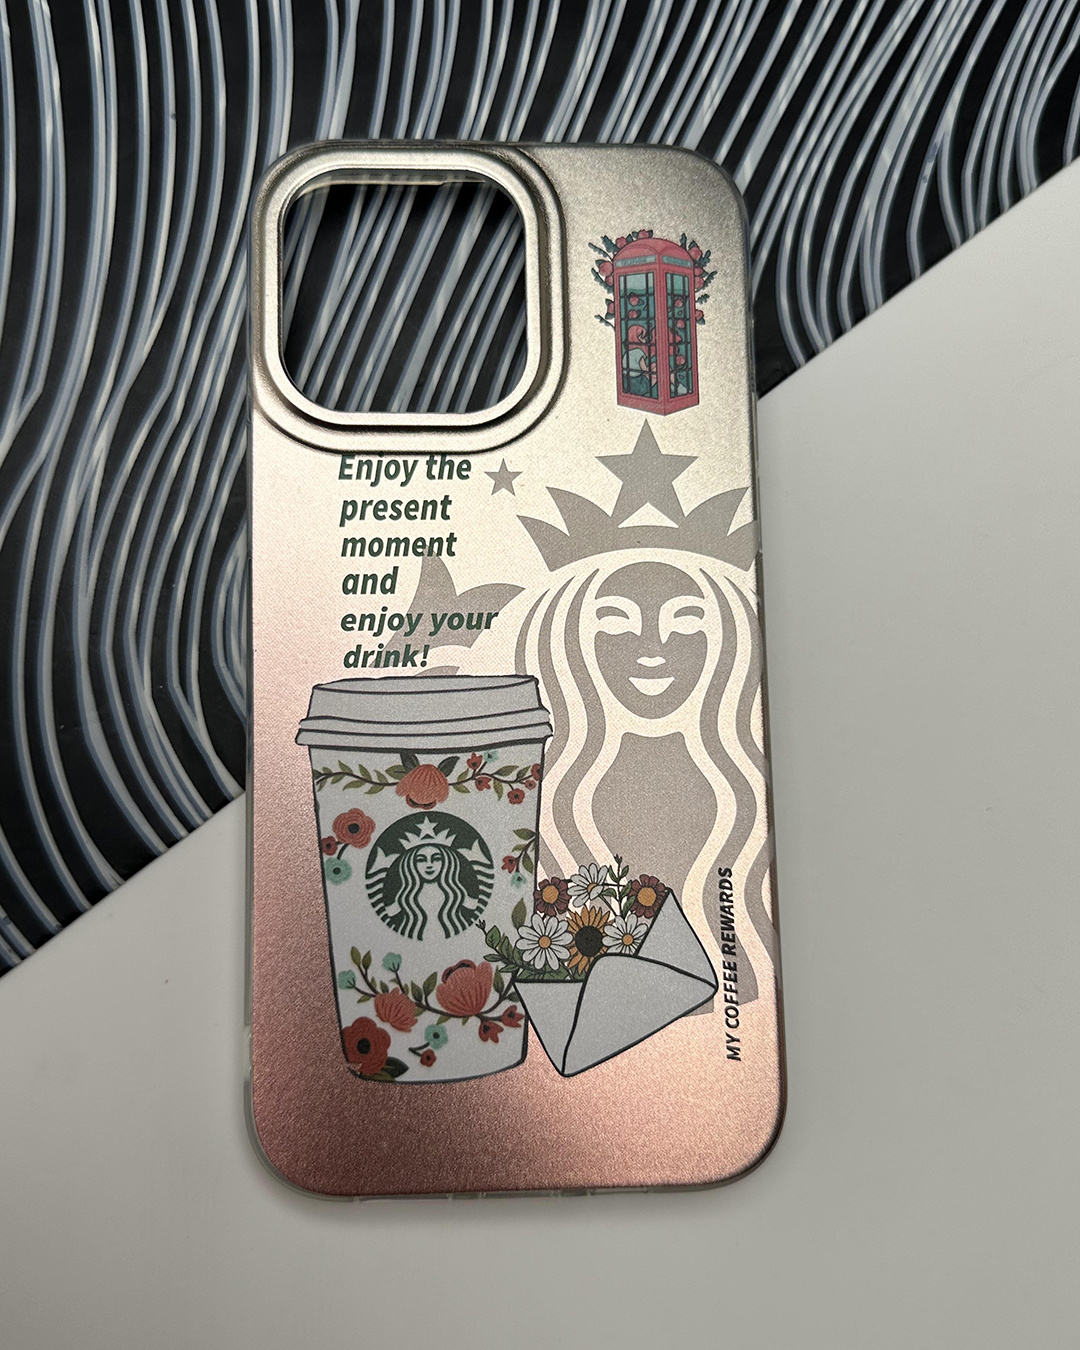 IPhone 11 Case Starbuck Print Design, Mobile Phone Case for IPhone, Latest IPhone Covers